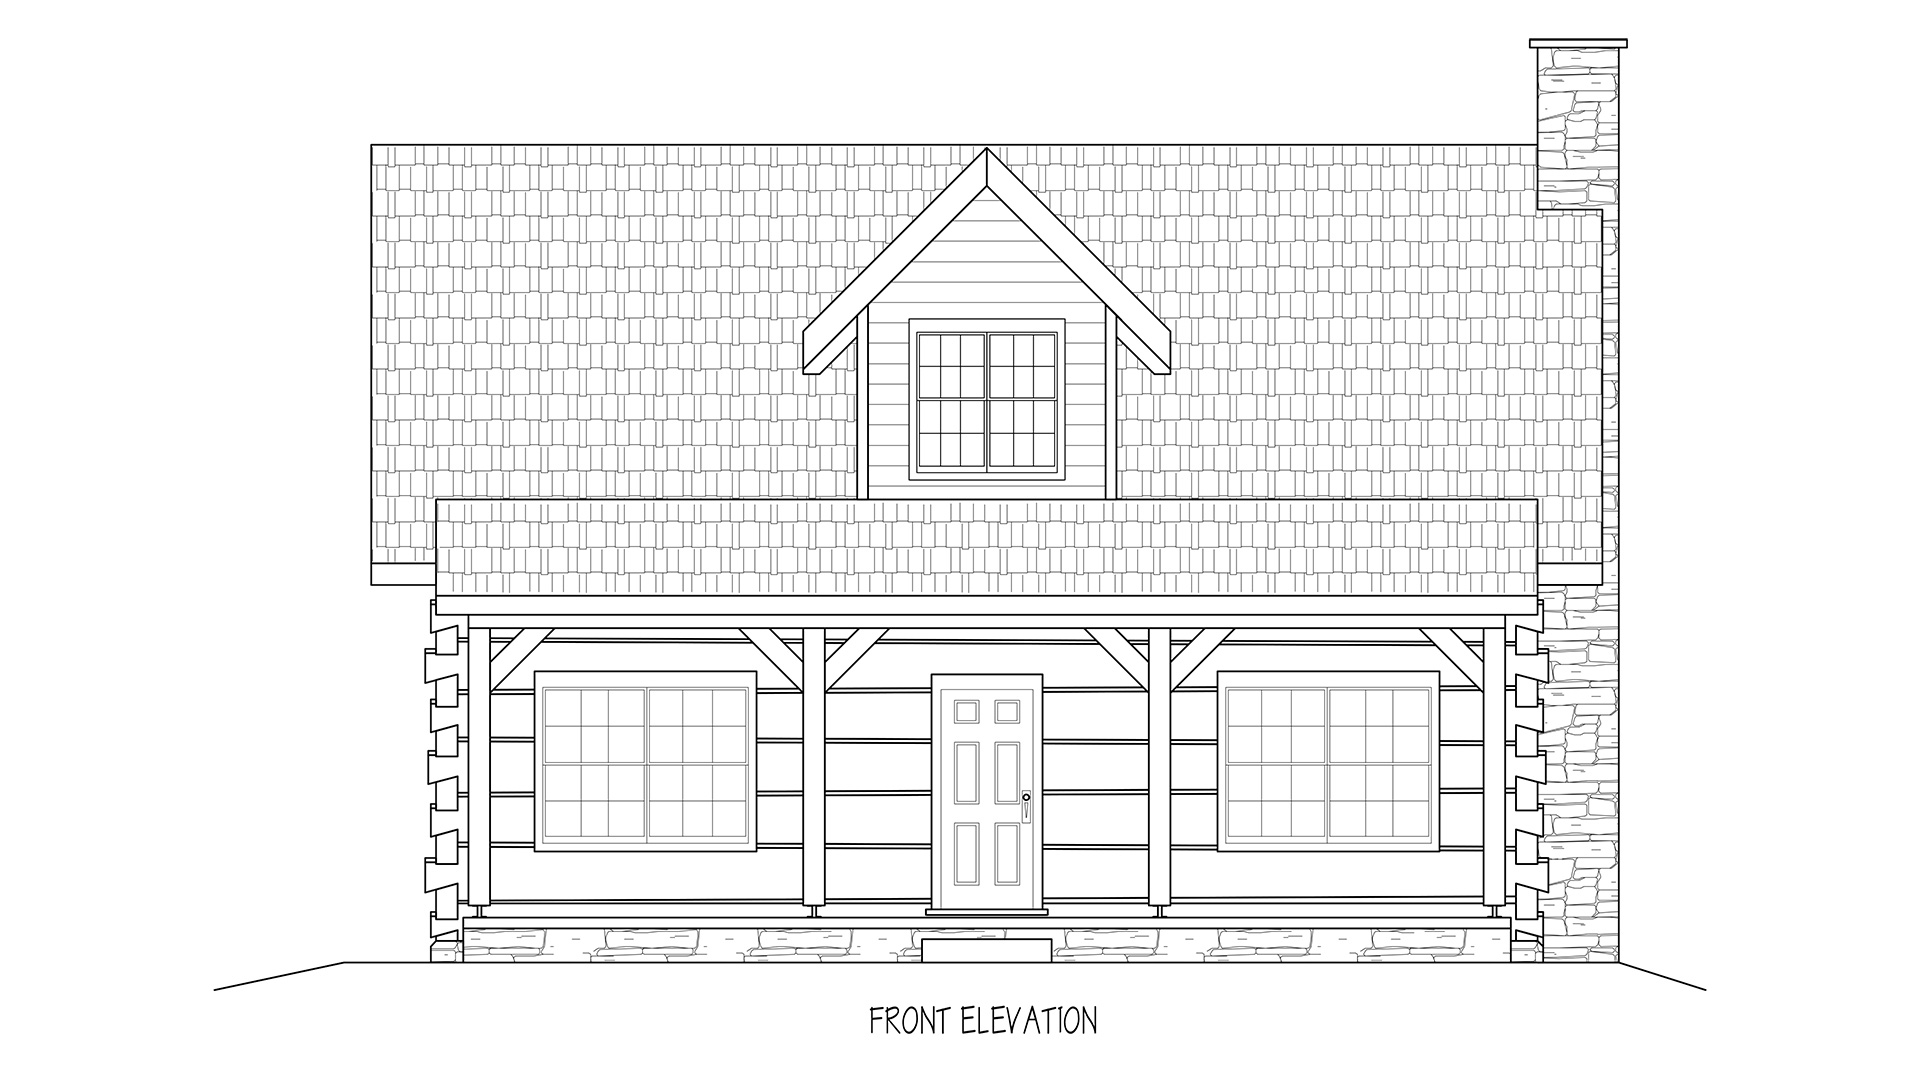 Featured Plan Spring 2018 Powers FrontElevation Hearthstone Homes